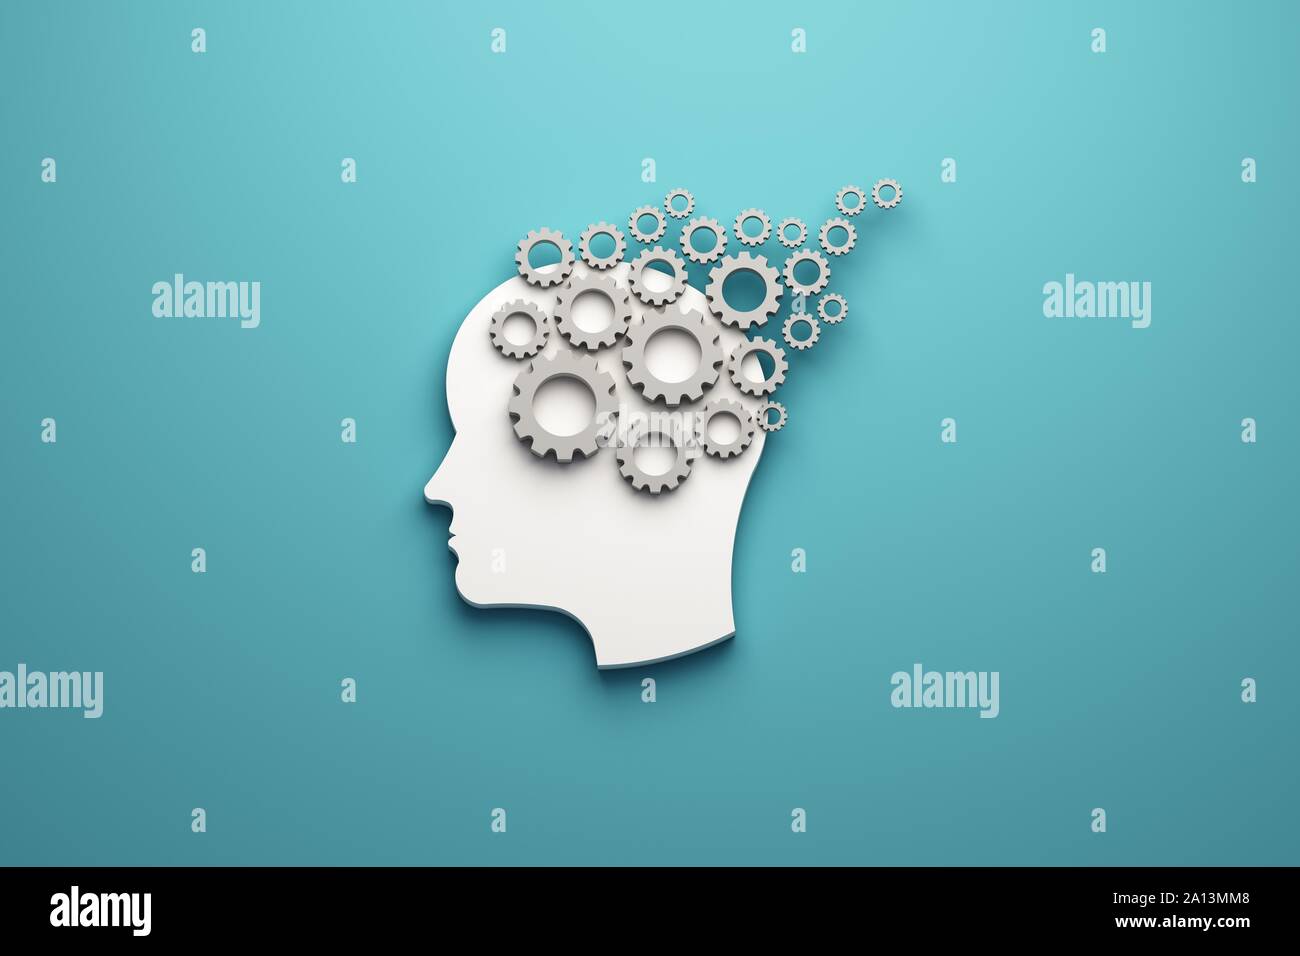 Head gears concept of memory training logo. Abstraction of thinking mind. This illustration serves as idea of teamwork mind working think brain system Stock Photo